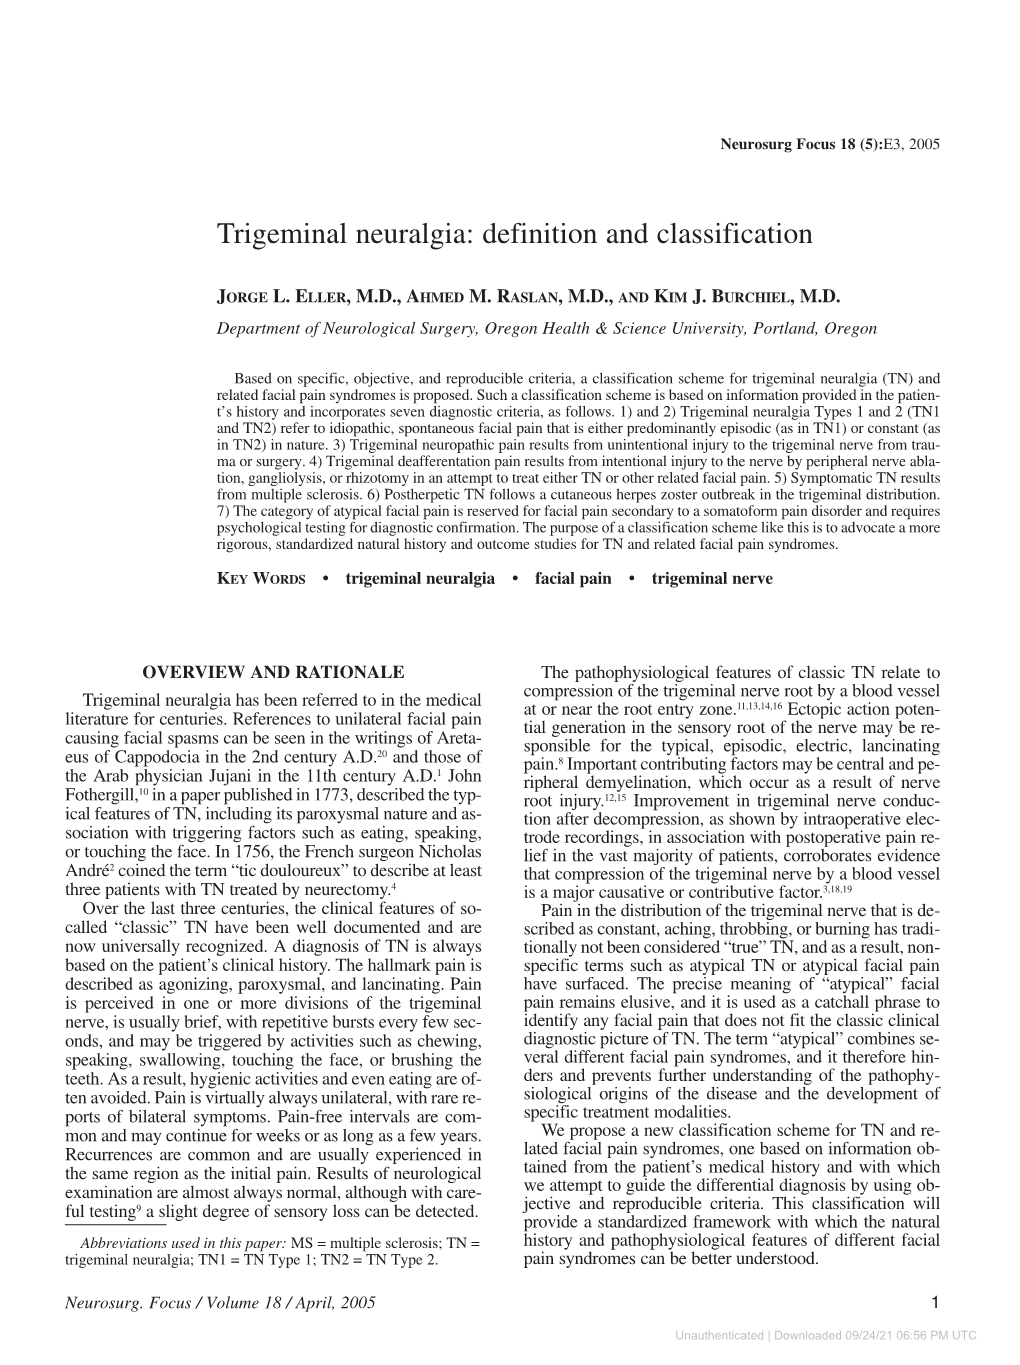 Trigeminal Neuralgia: Definition and Classification